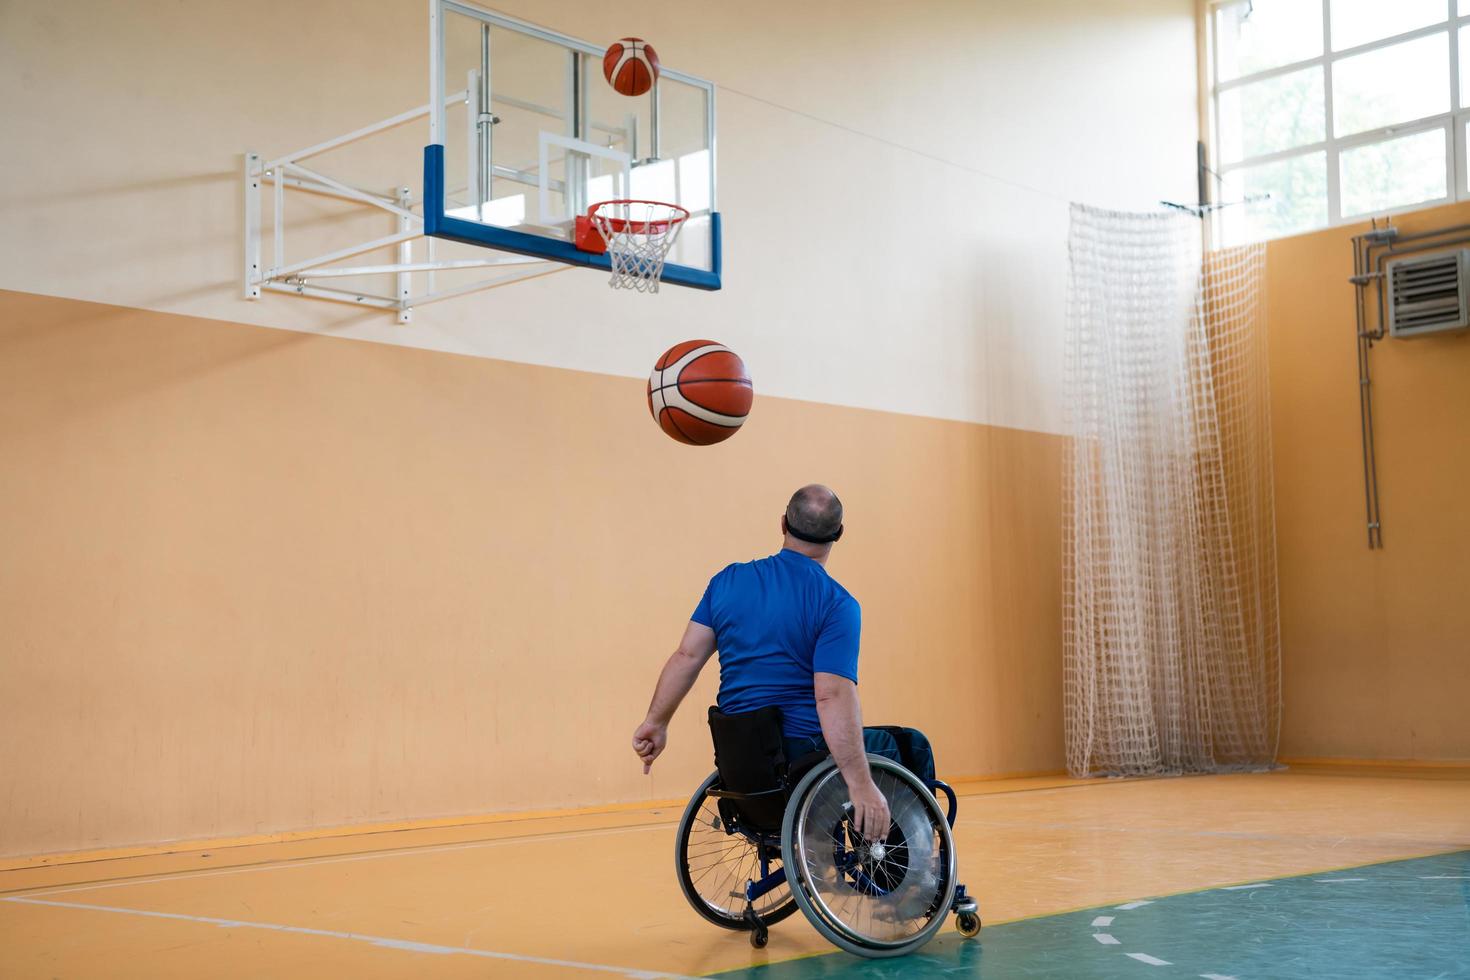 a war invalid in a wheelchair trains with a ball at a basketball club in training with professional sports equipment for the disabled. the concept of sport for people with disabilities photo